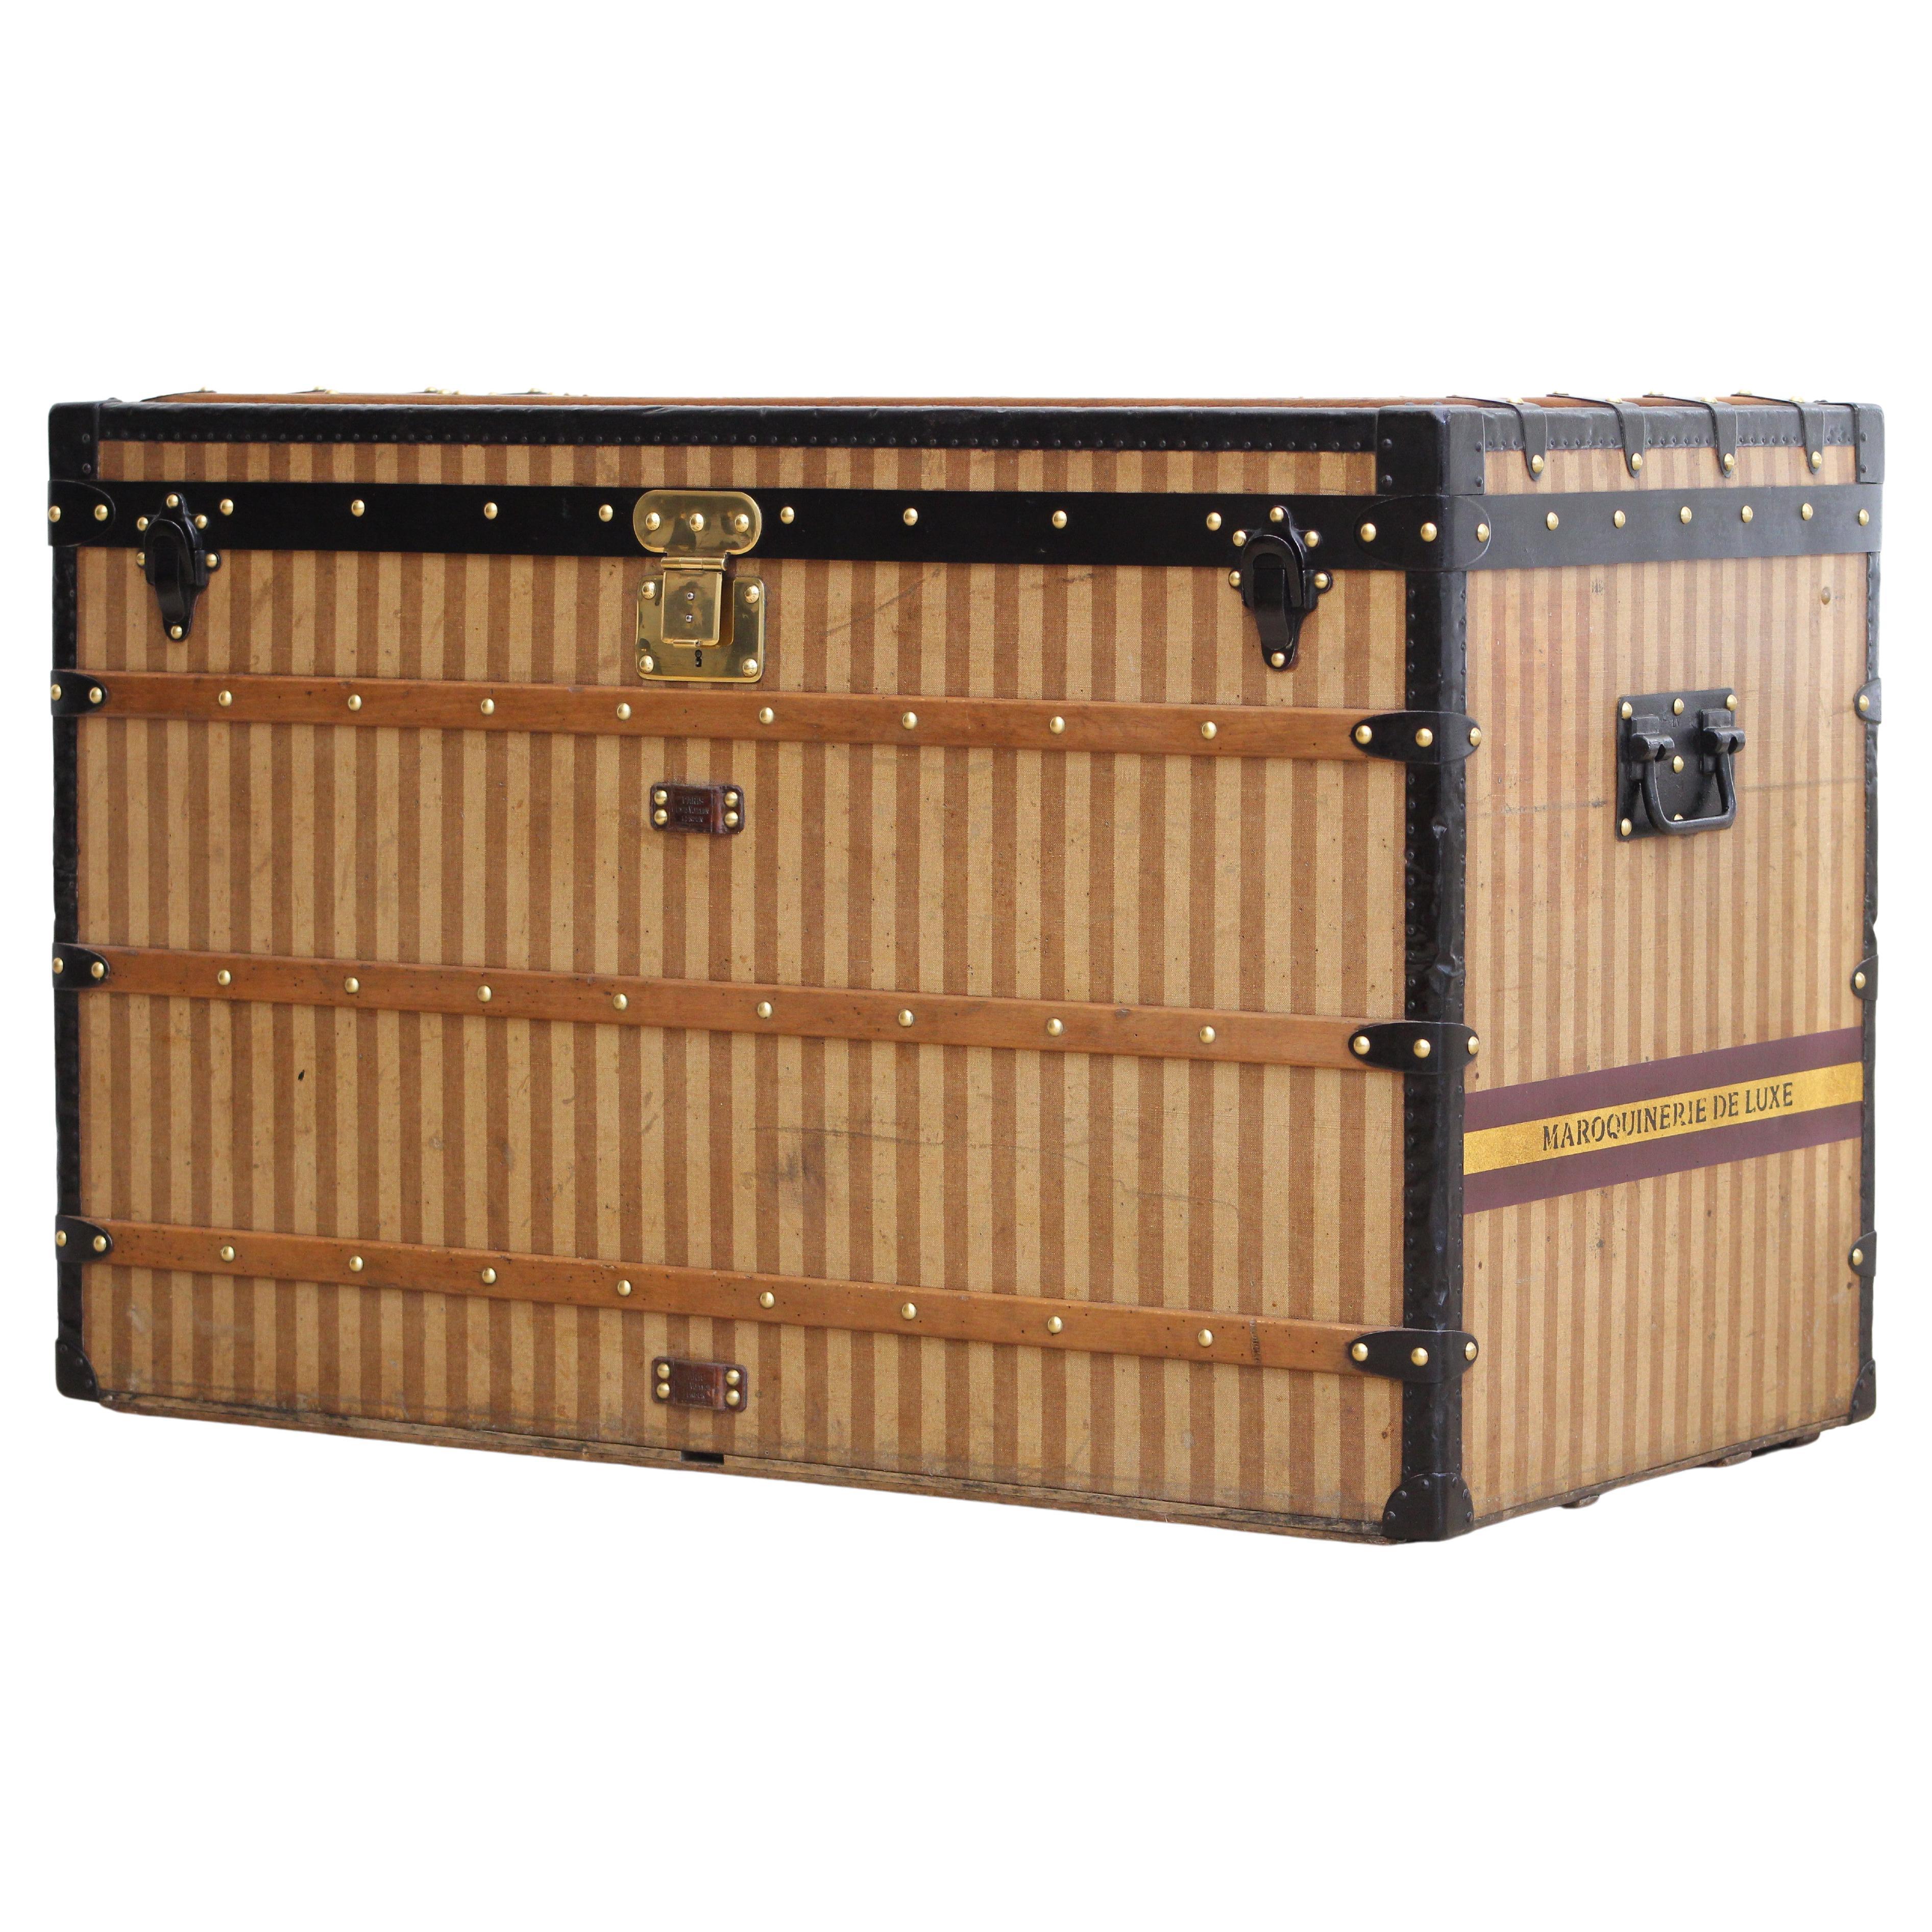 GoYARD Jewelry Box parish made in France black, gray wood and brown leather